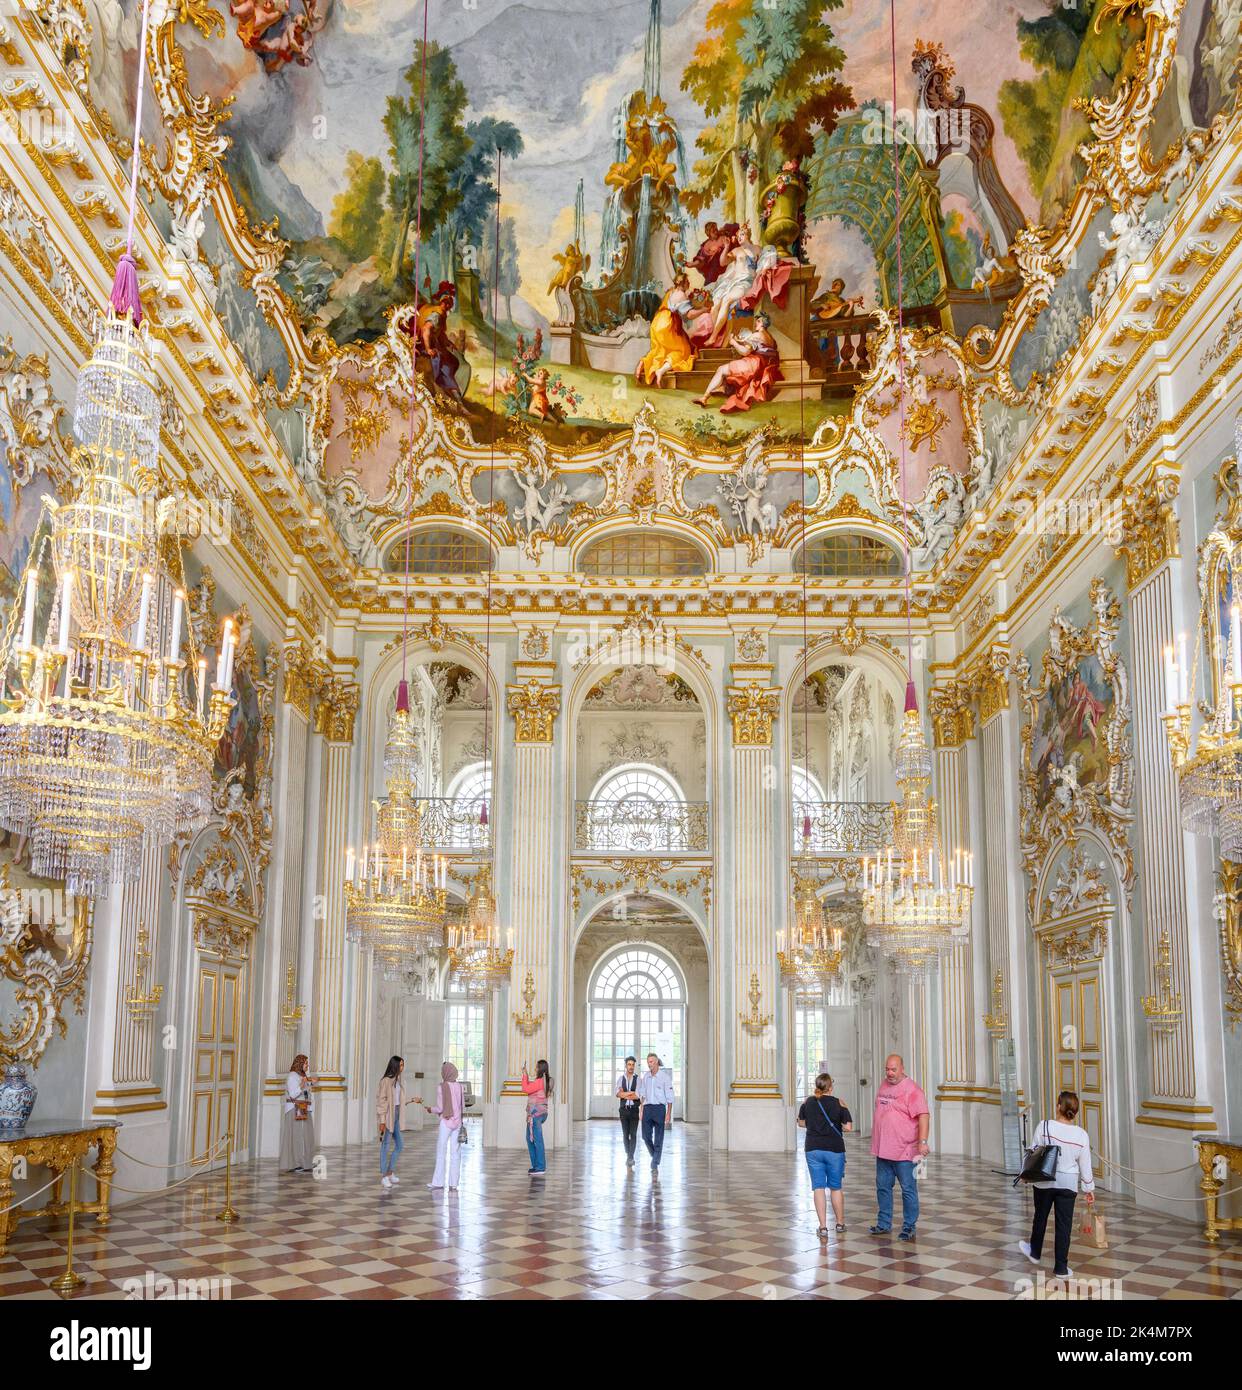 Steinerner Saal (Marble Hall) in the interior of Nymphenburg Palace (Schloss Nymphenburg), Munich, Bavaria, Germany Stock Photo